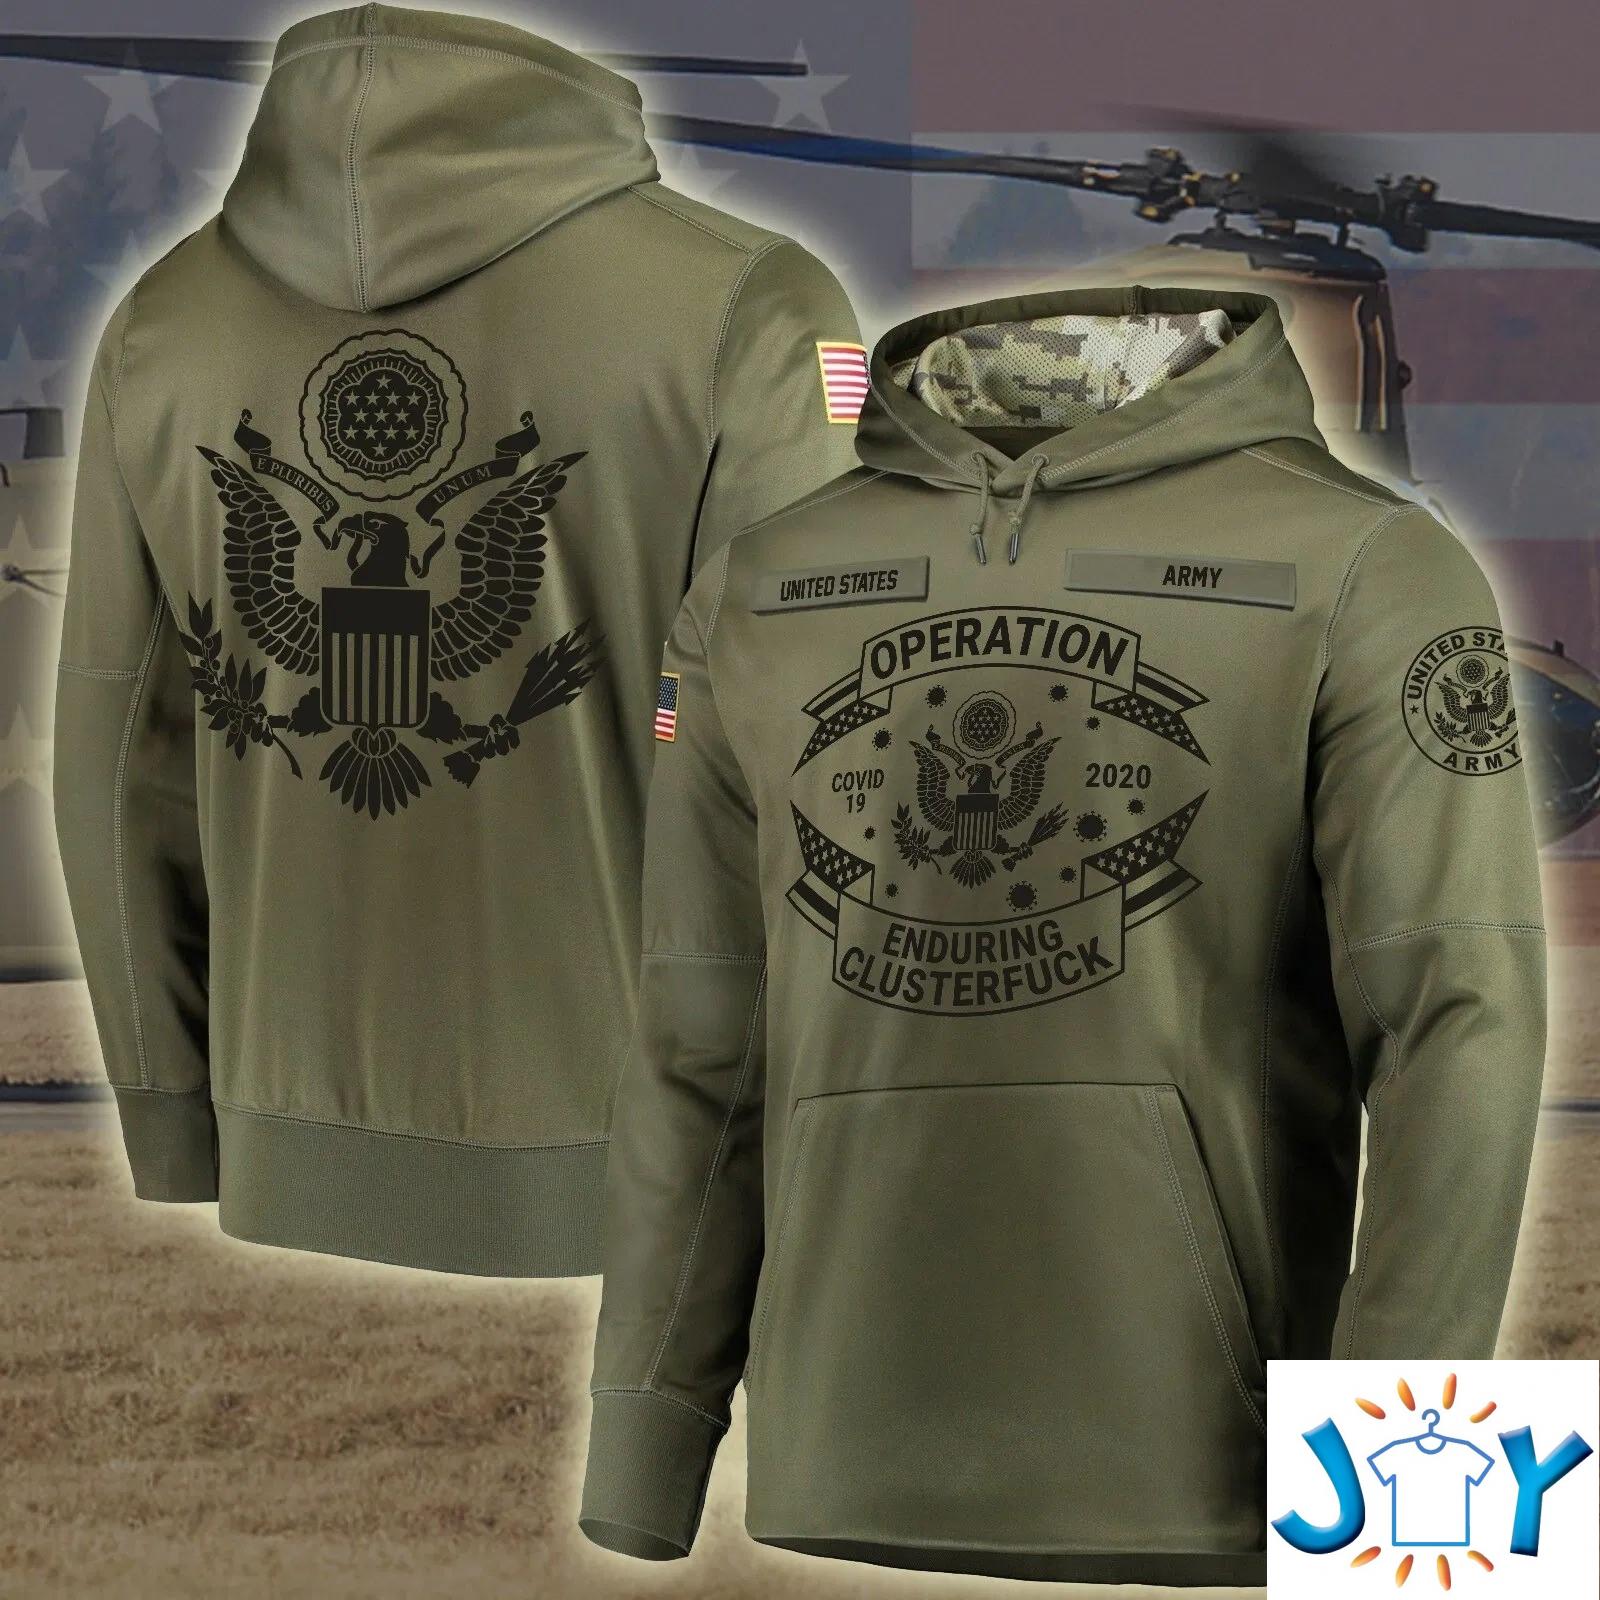 United States Army Operation Enduring Clusterfuck Personalized 3D Hoodie